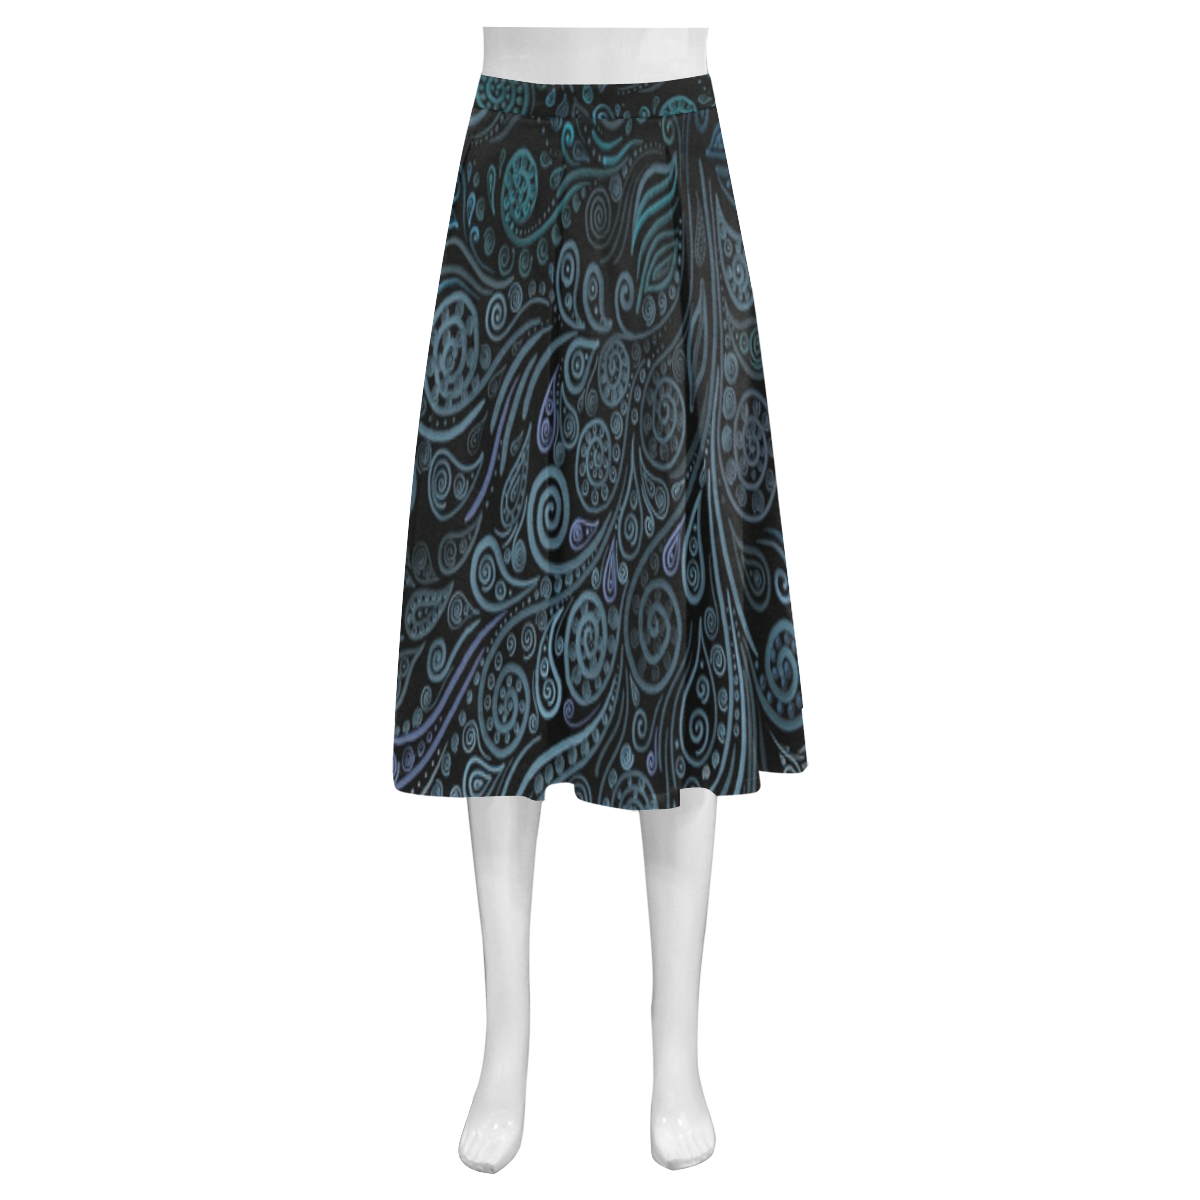 3D ornaments, psychedelic blue Mnemosyne Women's Crepe Skirt (Model D16)